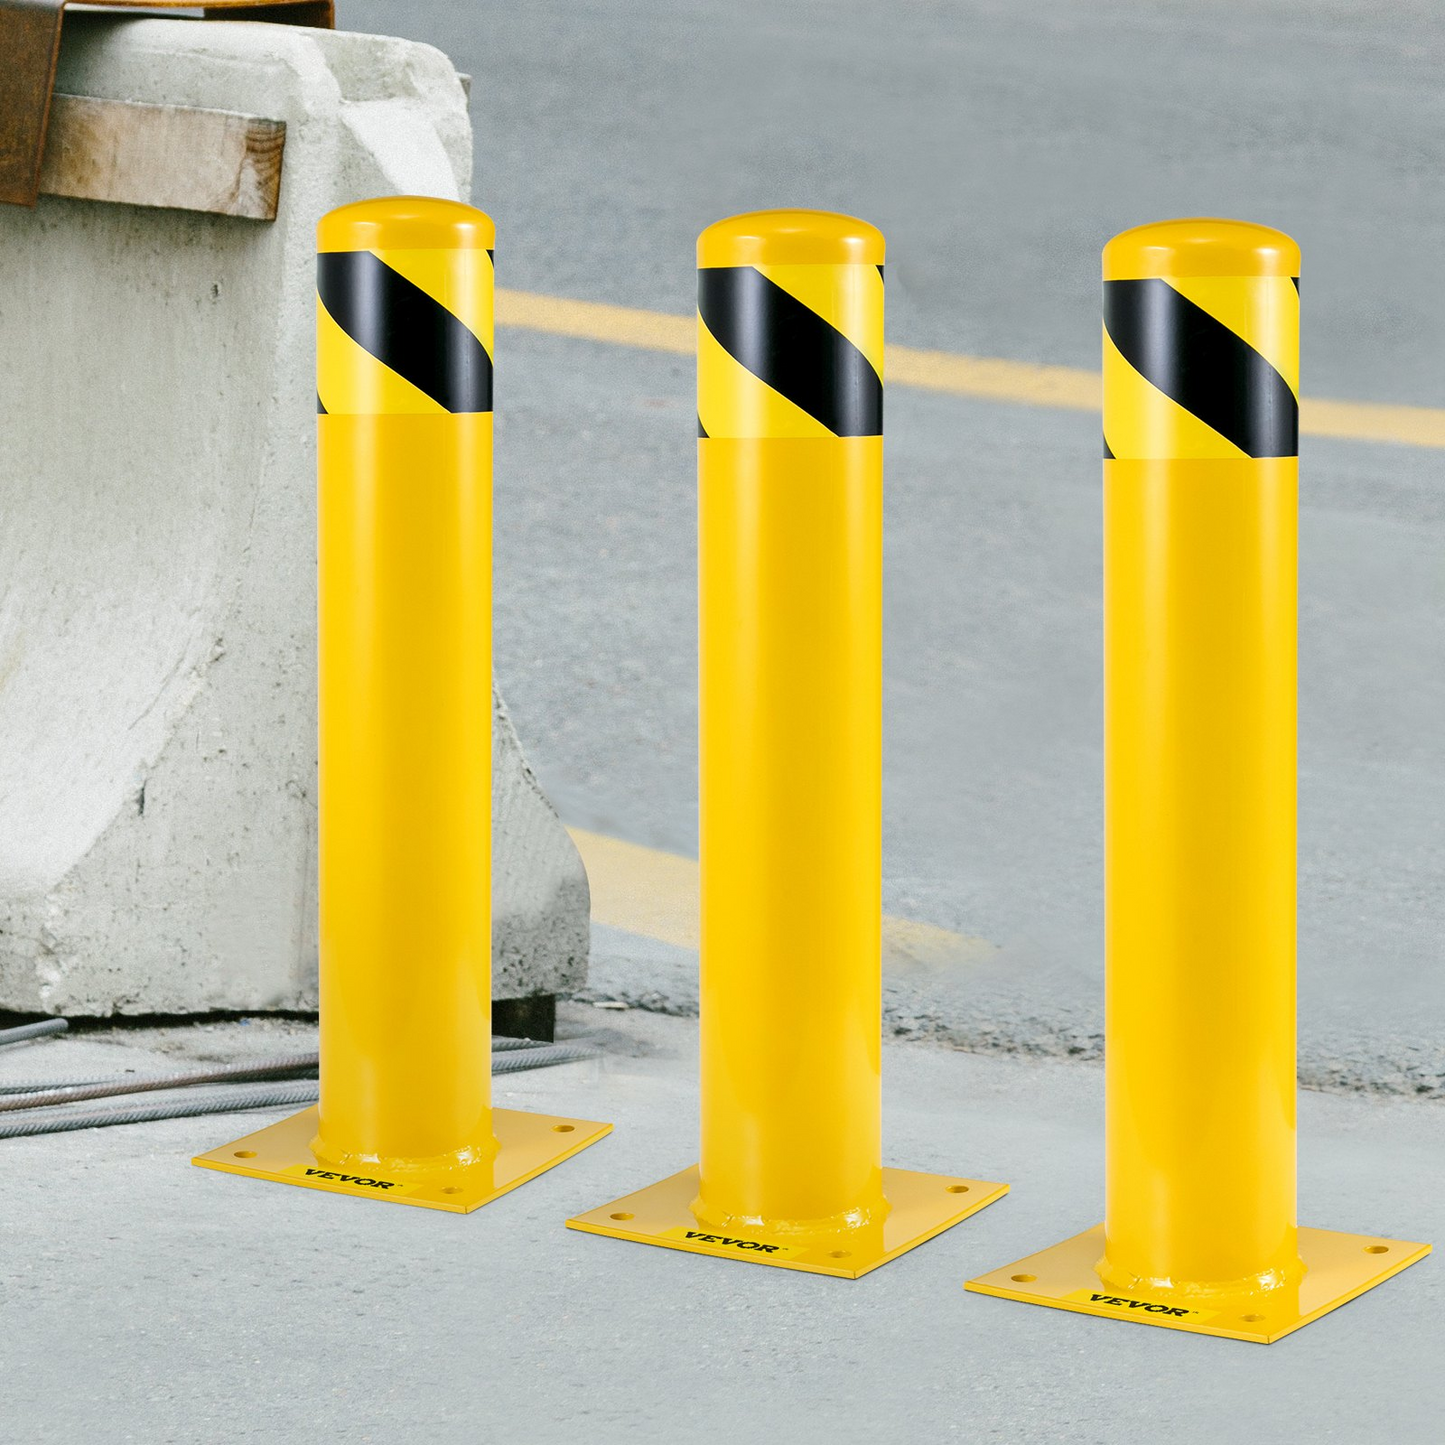 VEVOR Safety Bollard, 24"x5.5" Safety Barrier Bollard, 5-1/2" OD 24" Height Yellow Powder Coat Pipe Steel Safety Barrier with 4 Free Anchor Bolts for Traffic-Sensitive Area, Goodies N Stuff